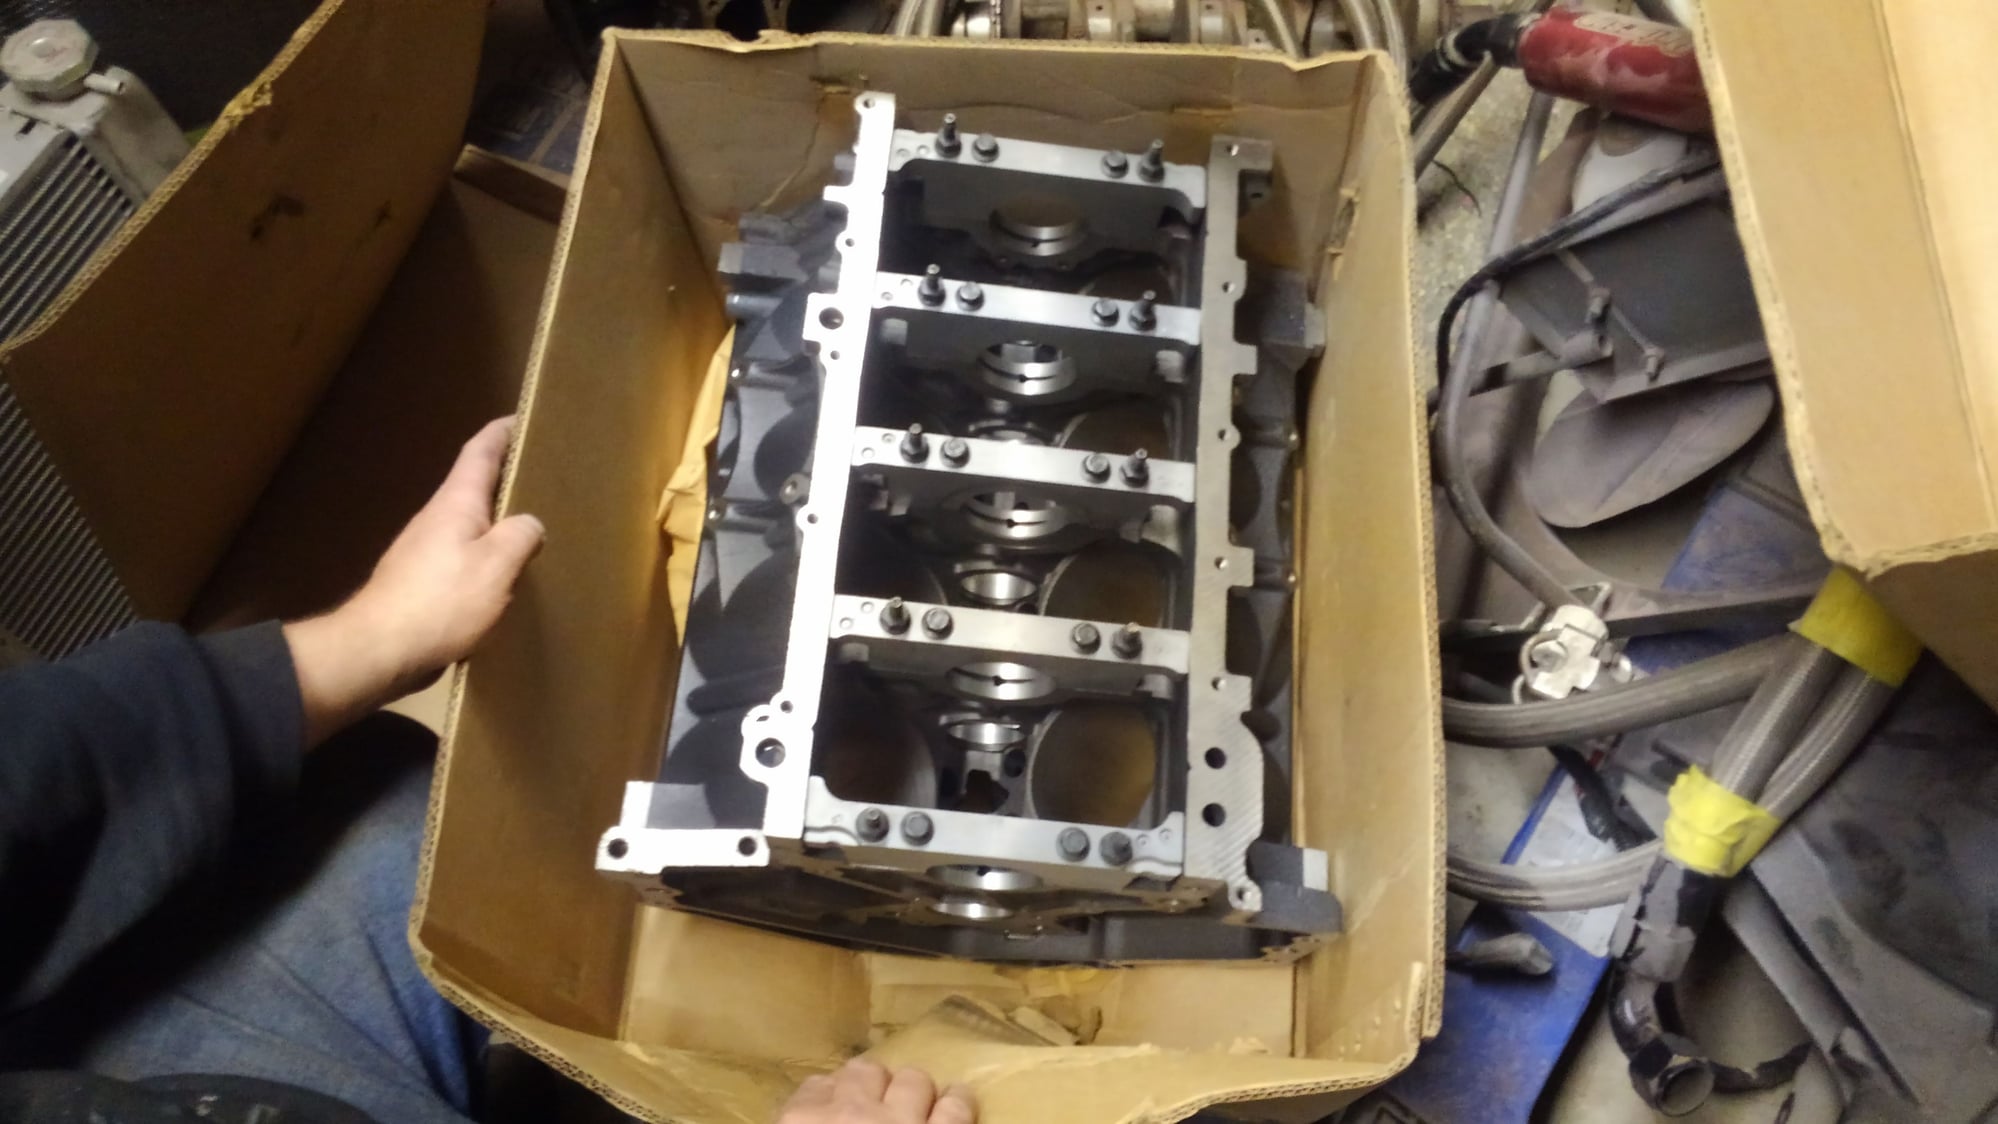 Engine - Internals - brand new 6.0L bare block still in the crate with ARP main studs/4 other 6.0L blocks - New - Slippery Rock, PA 16057, United States